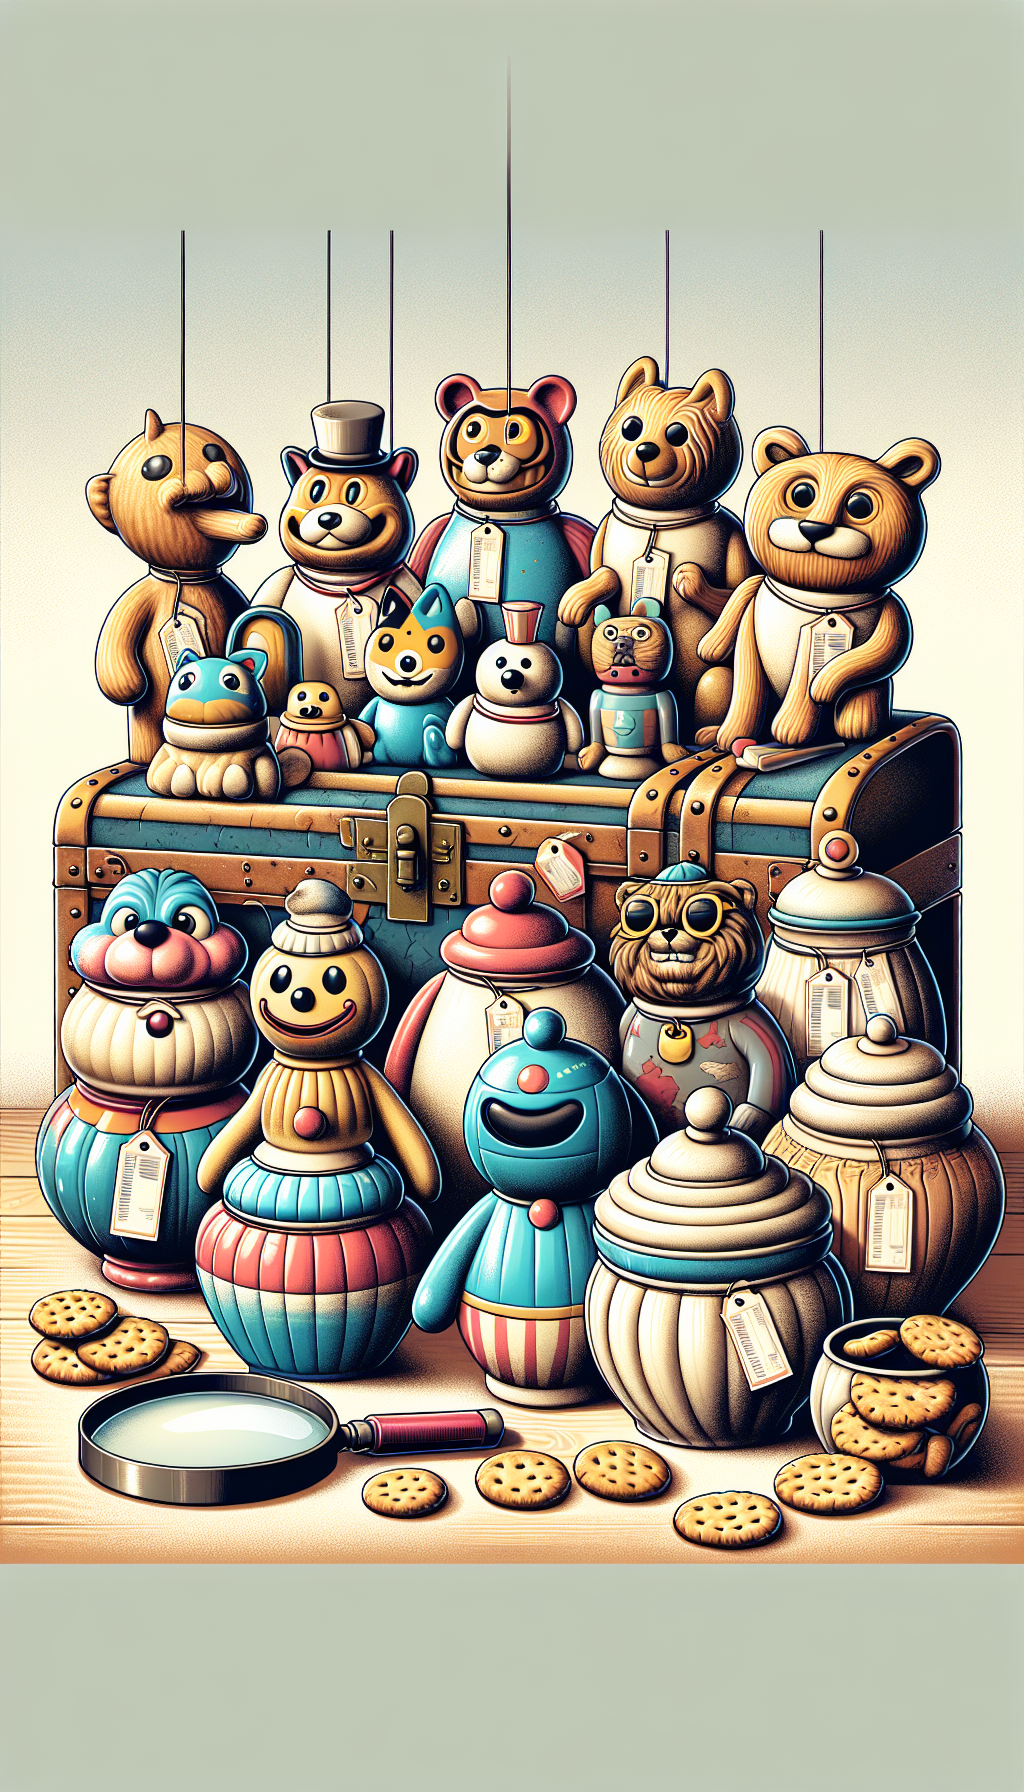 A whimsical illustration featuring an array of nostalgic, anthropomorphic cookie jars of various iconic designs—ranging from vintage animals to classic storybook characters—each with a price tag swing tag, showcasing their individual value. They are perched atop an antique treasure chest overflowing with cookies, with a magnifying glass positioned above, hinting at the appraisal and identification process.